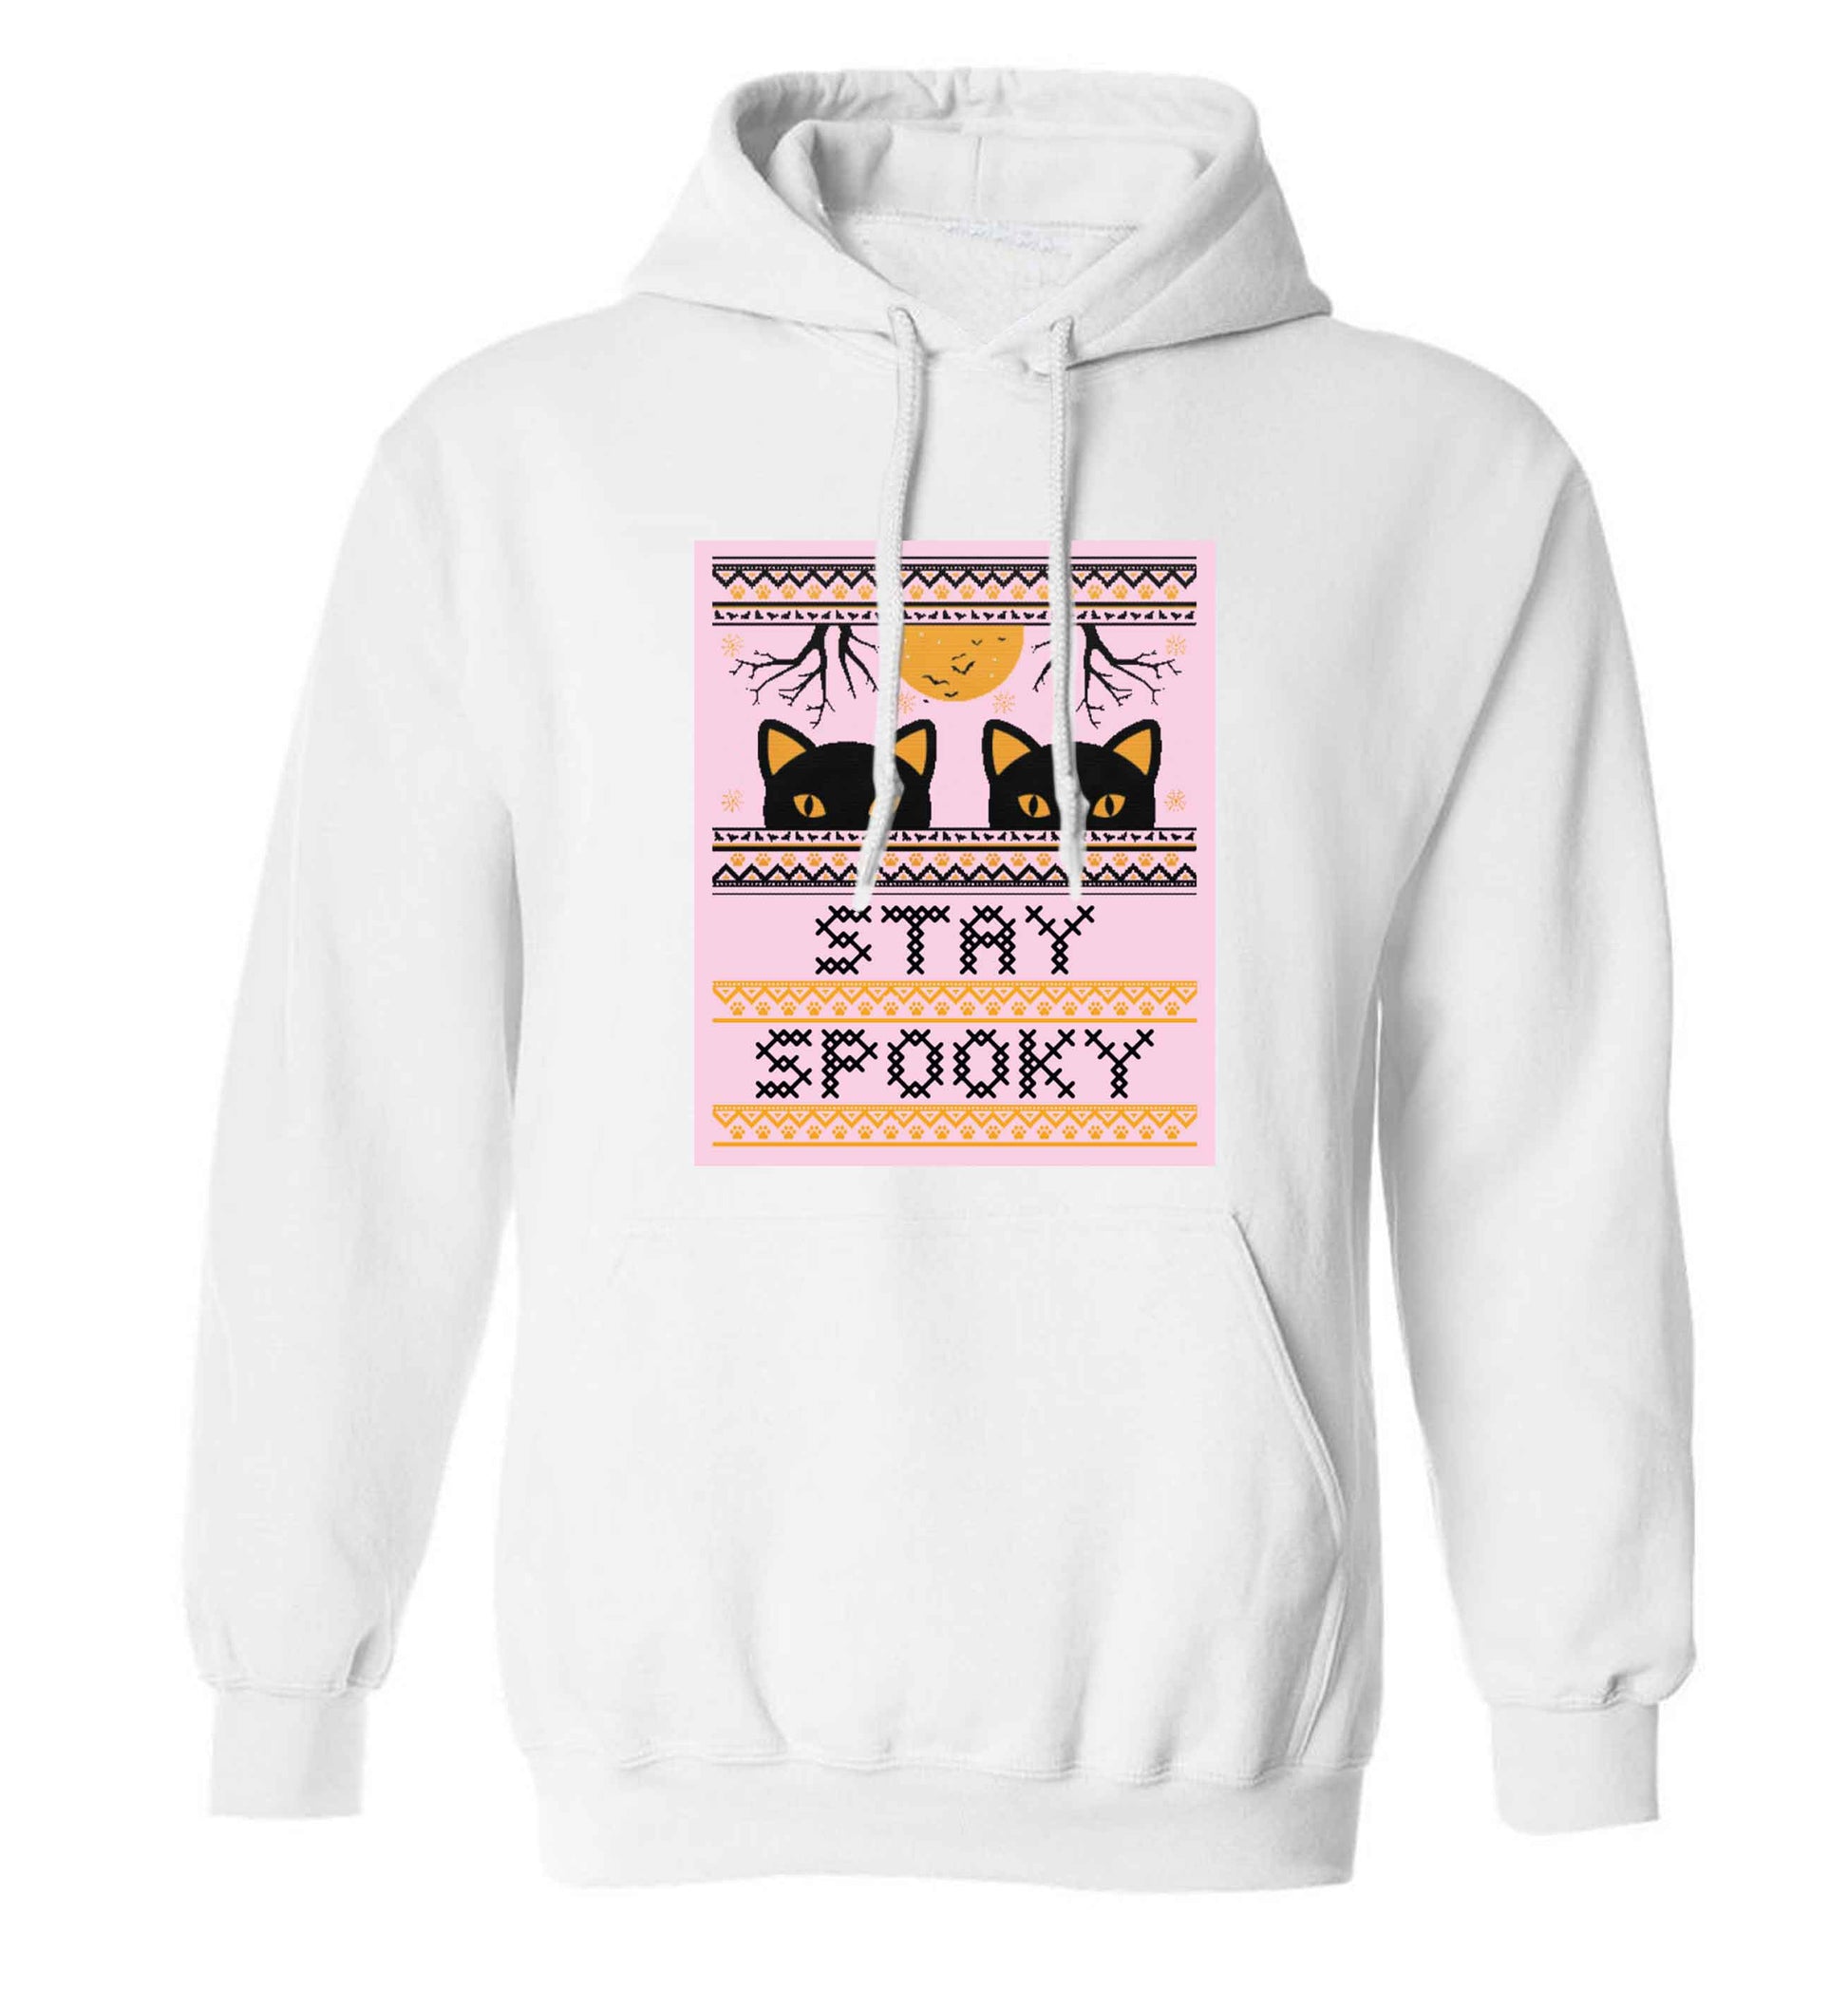 Stay spooky adults unisex white hoodie 2XL